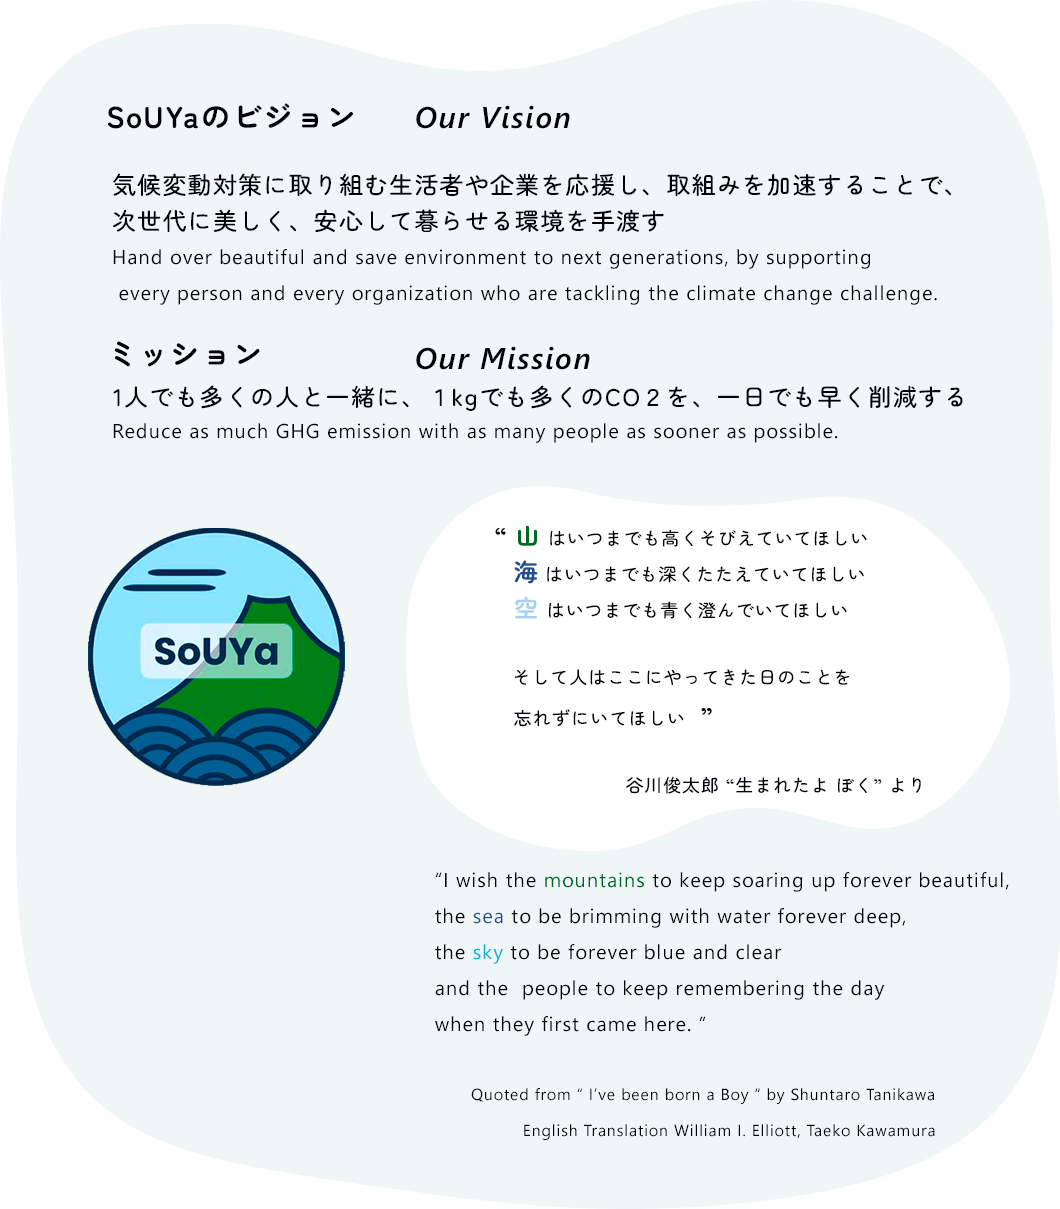 SoUYa's Vision and Mission